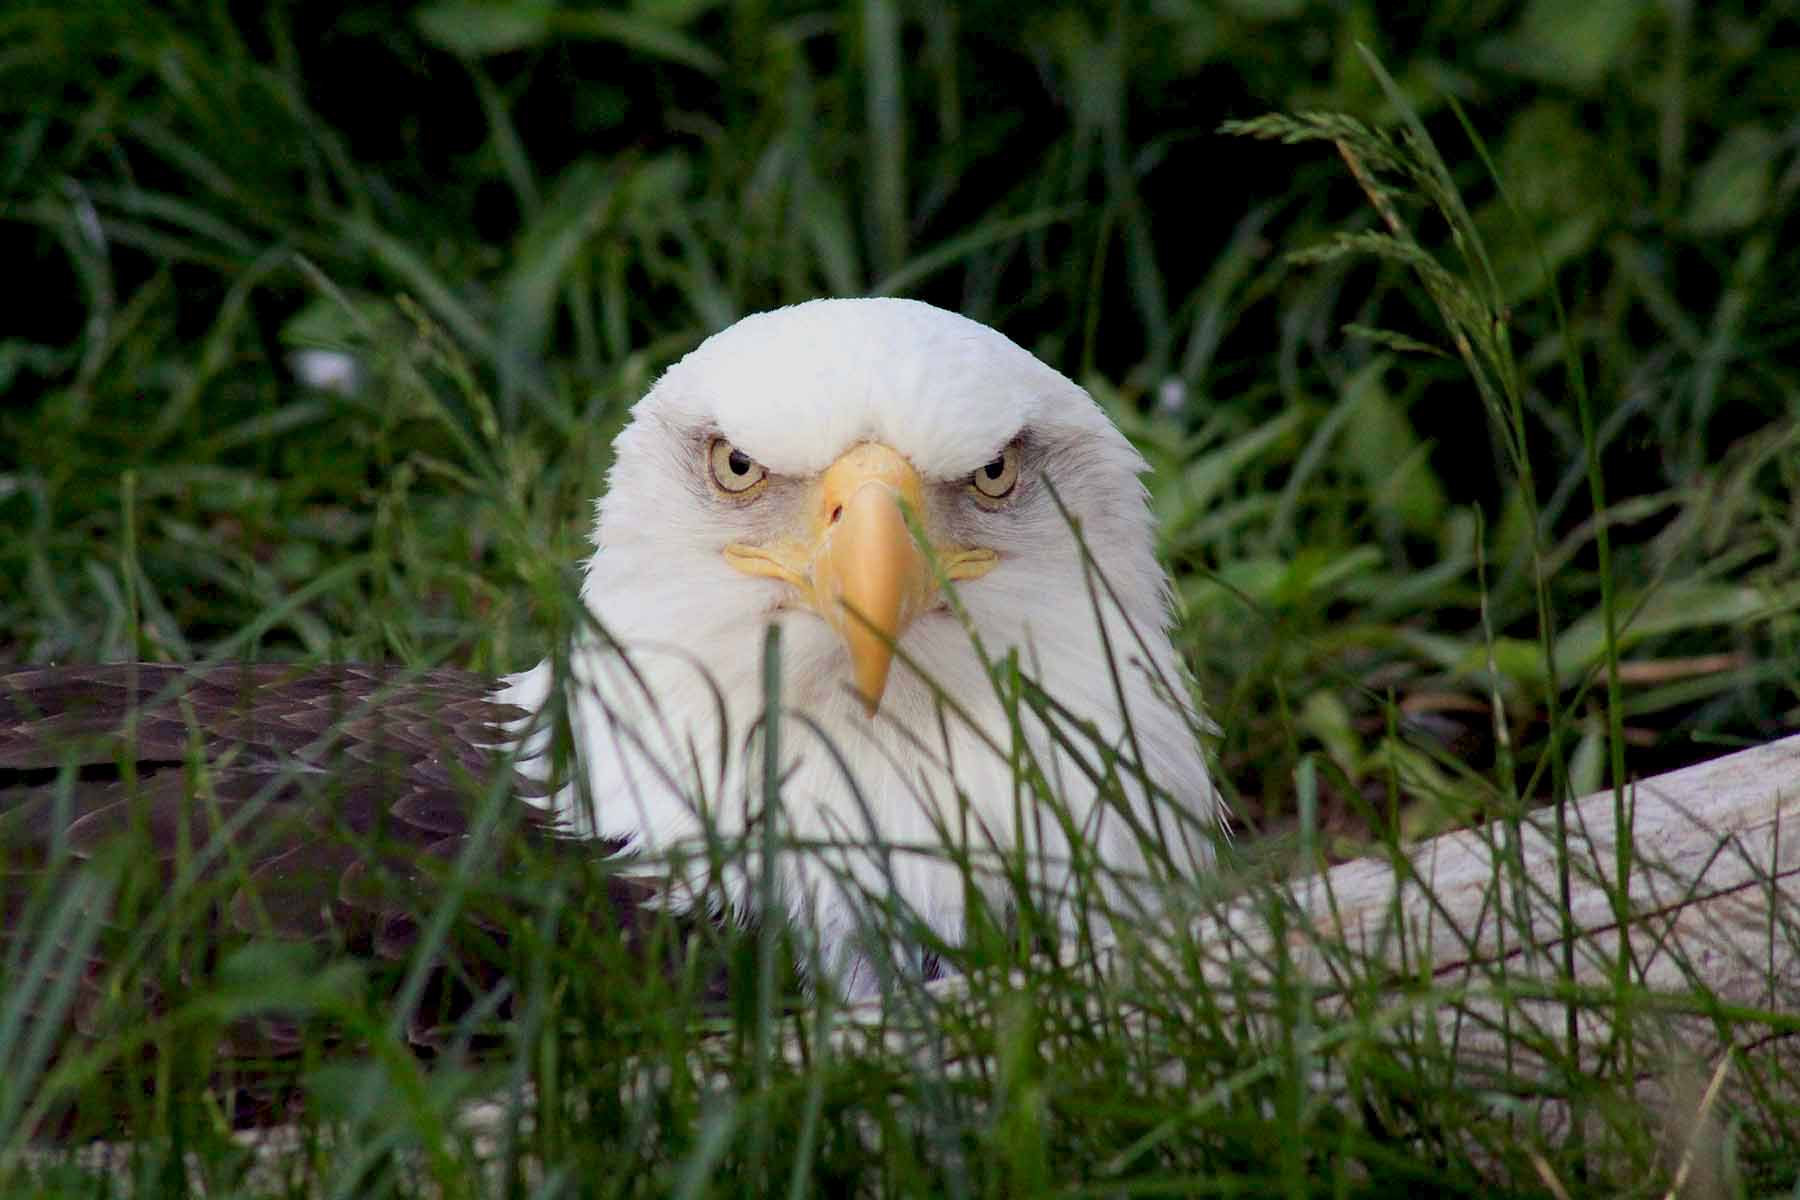 Eagle Asking Are You Looking At Me? (user submitted)